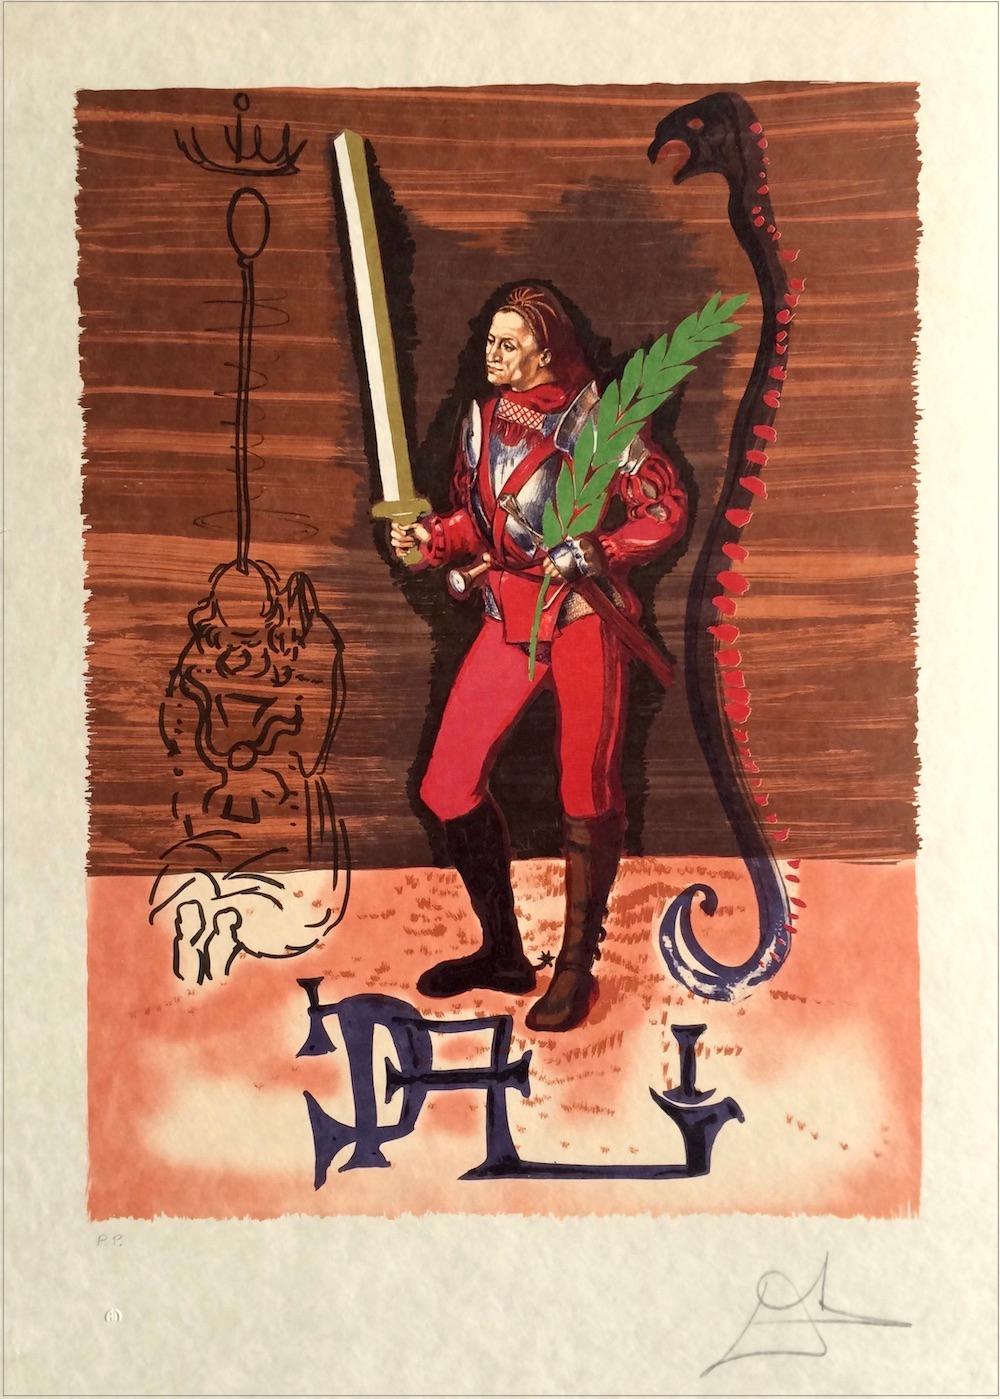 Salvador Dalí Figurative Print - COLUMBUS DISCOVERS AMERICA(Jack of Swords) Signed Lithograph on Japon Paper, Red